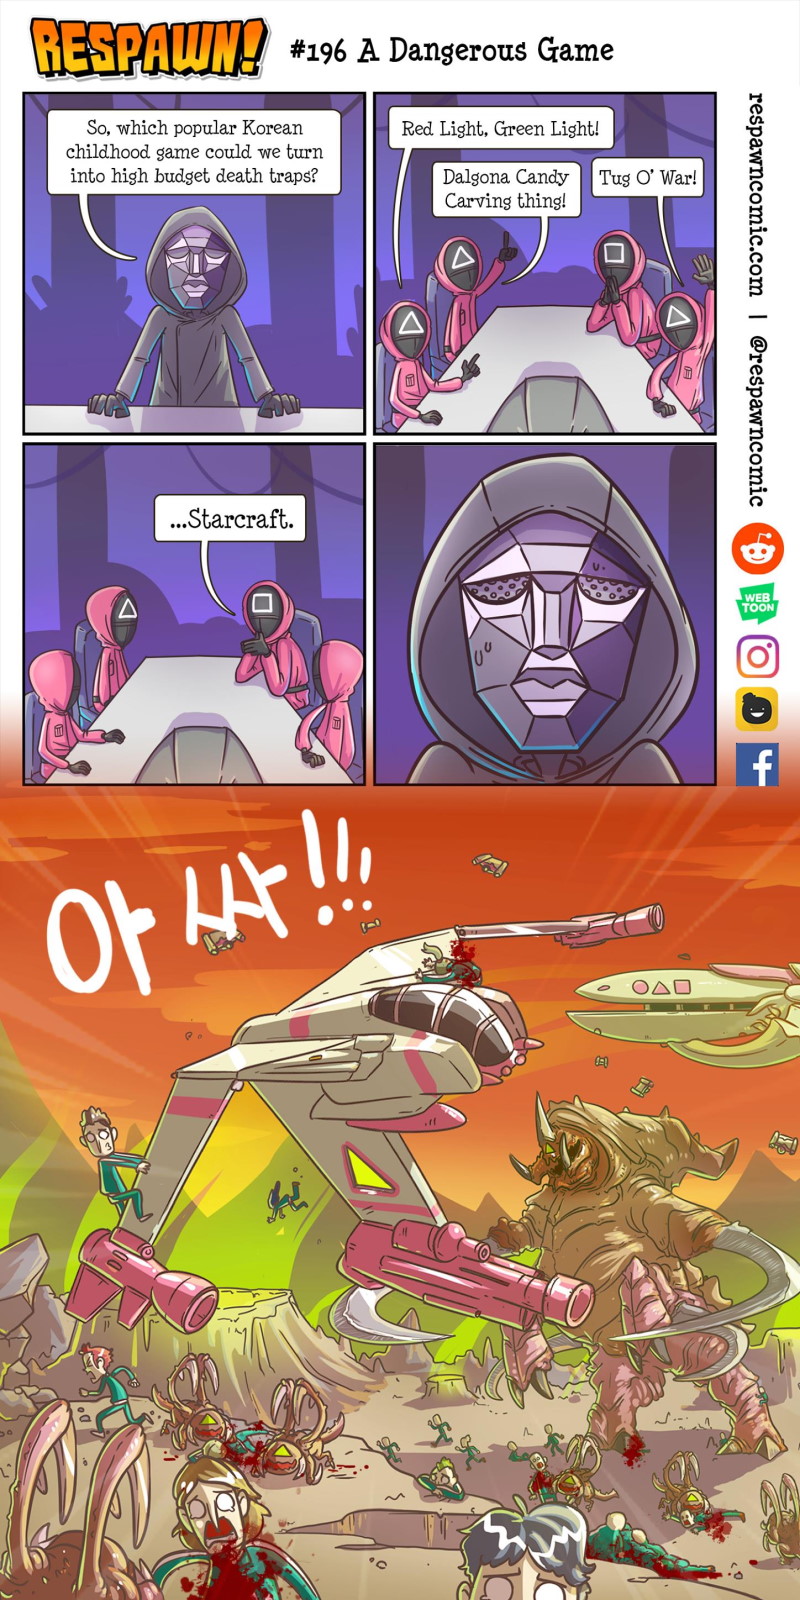 instagram.com respawncomic - Squid game was fun and all but it always seemed to be missing something. Turns out that something was an Ultralisk.jpg